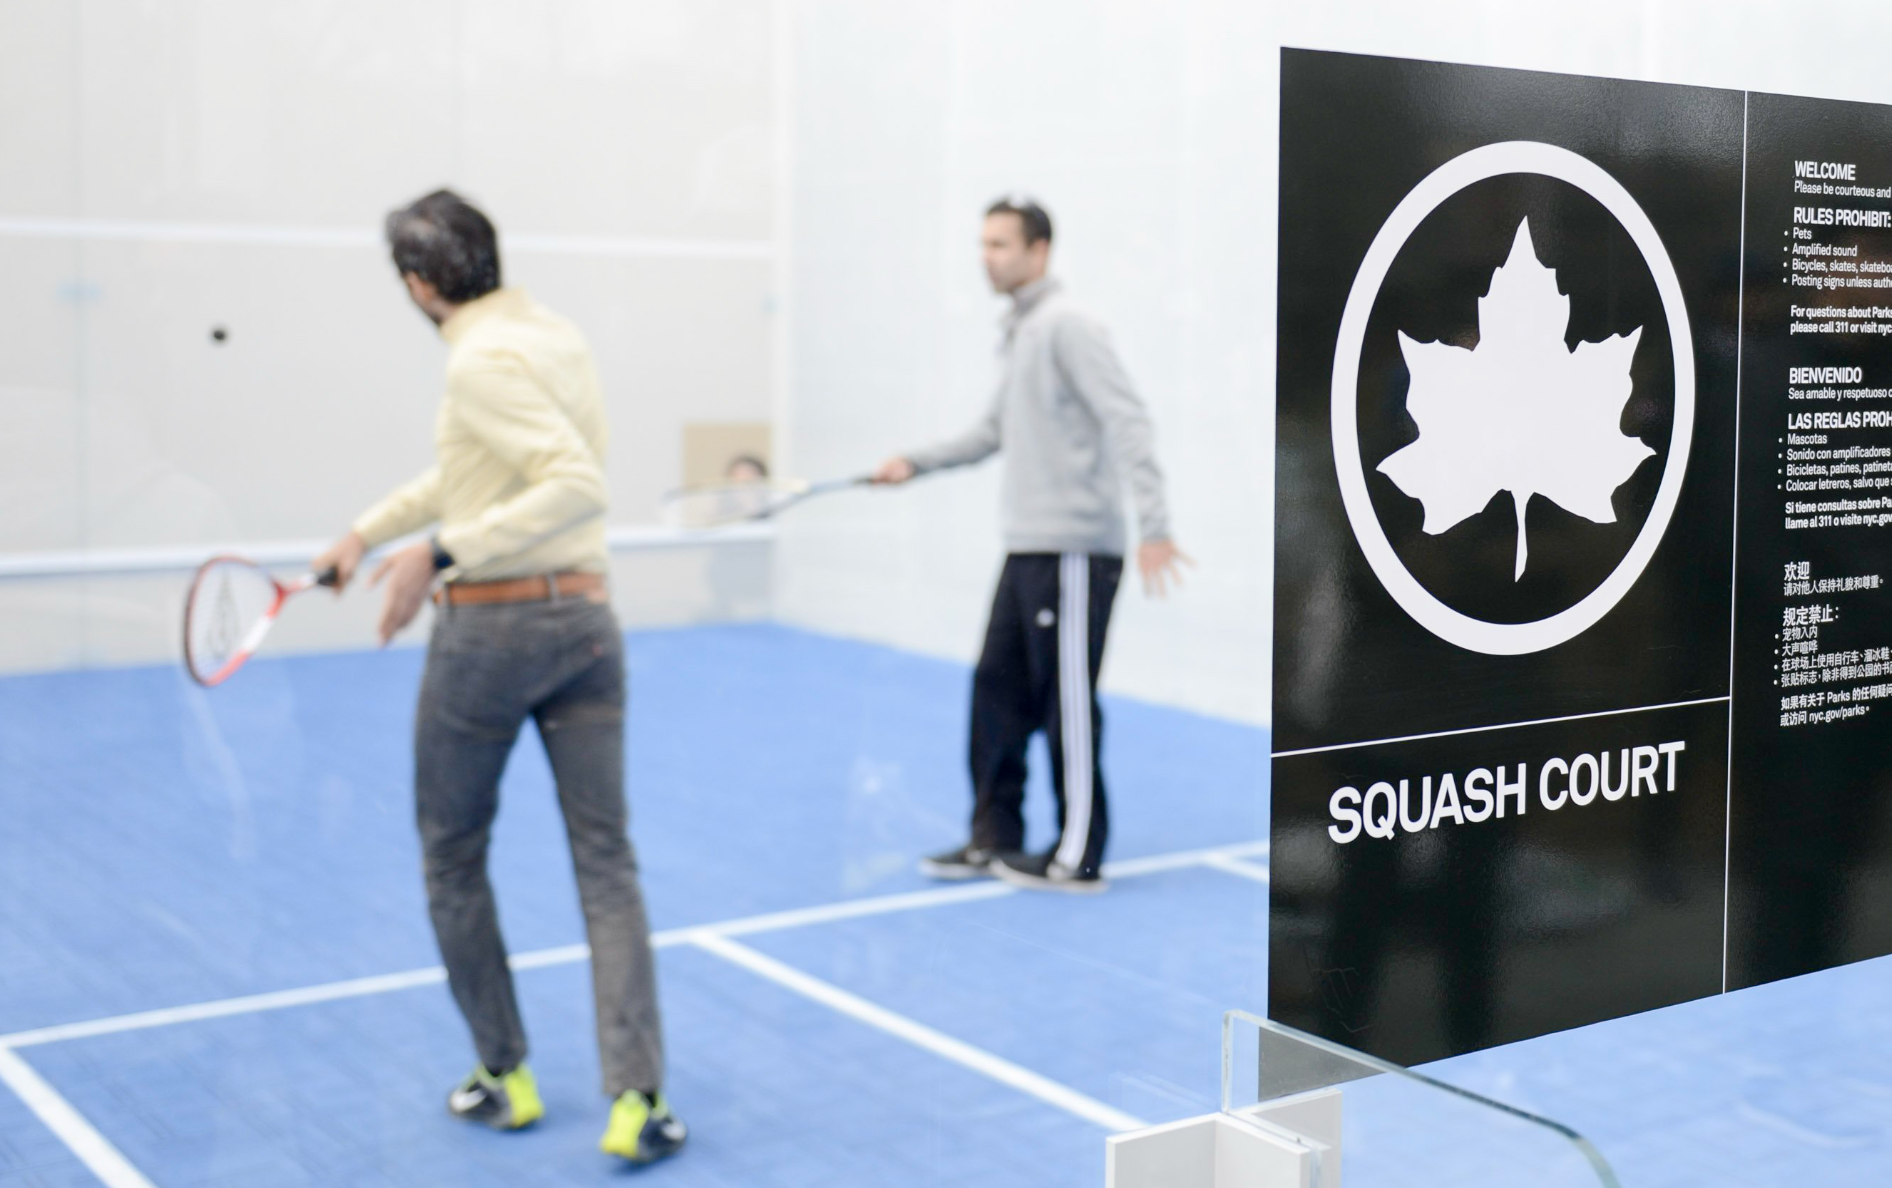 Two people play squash in NYC Parks' first and only free outdoor squash court.